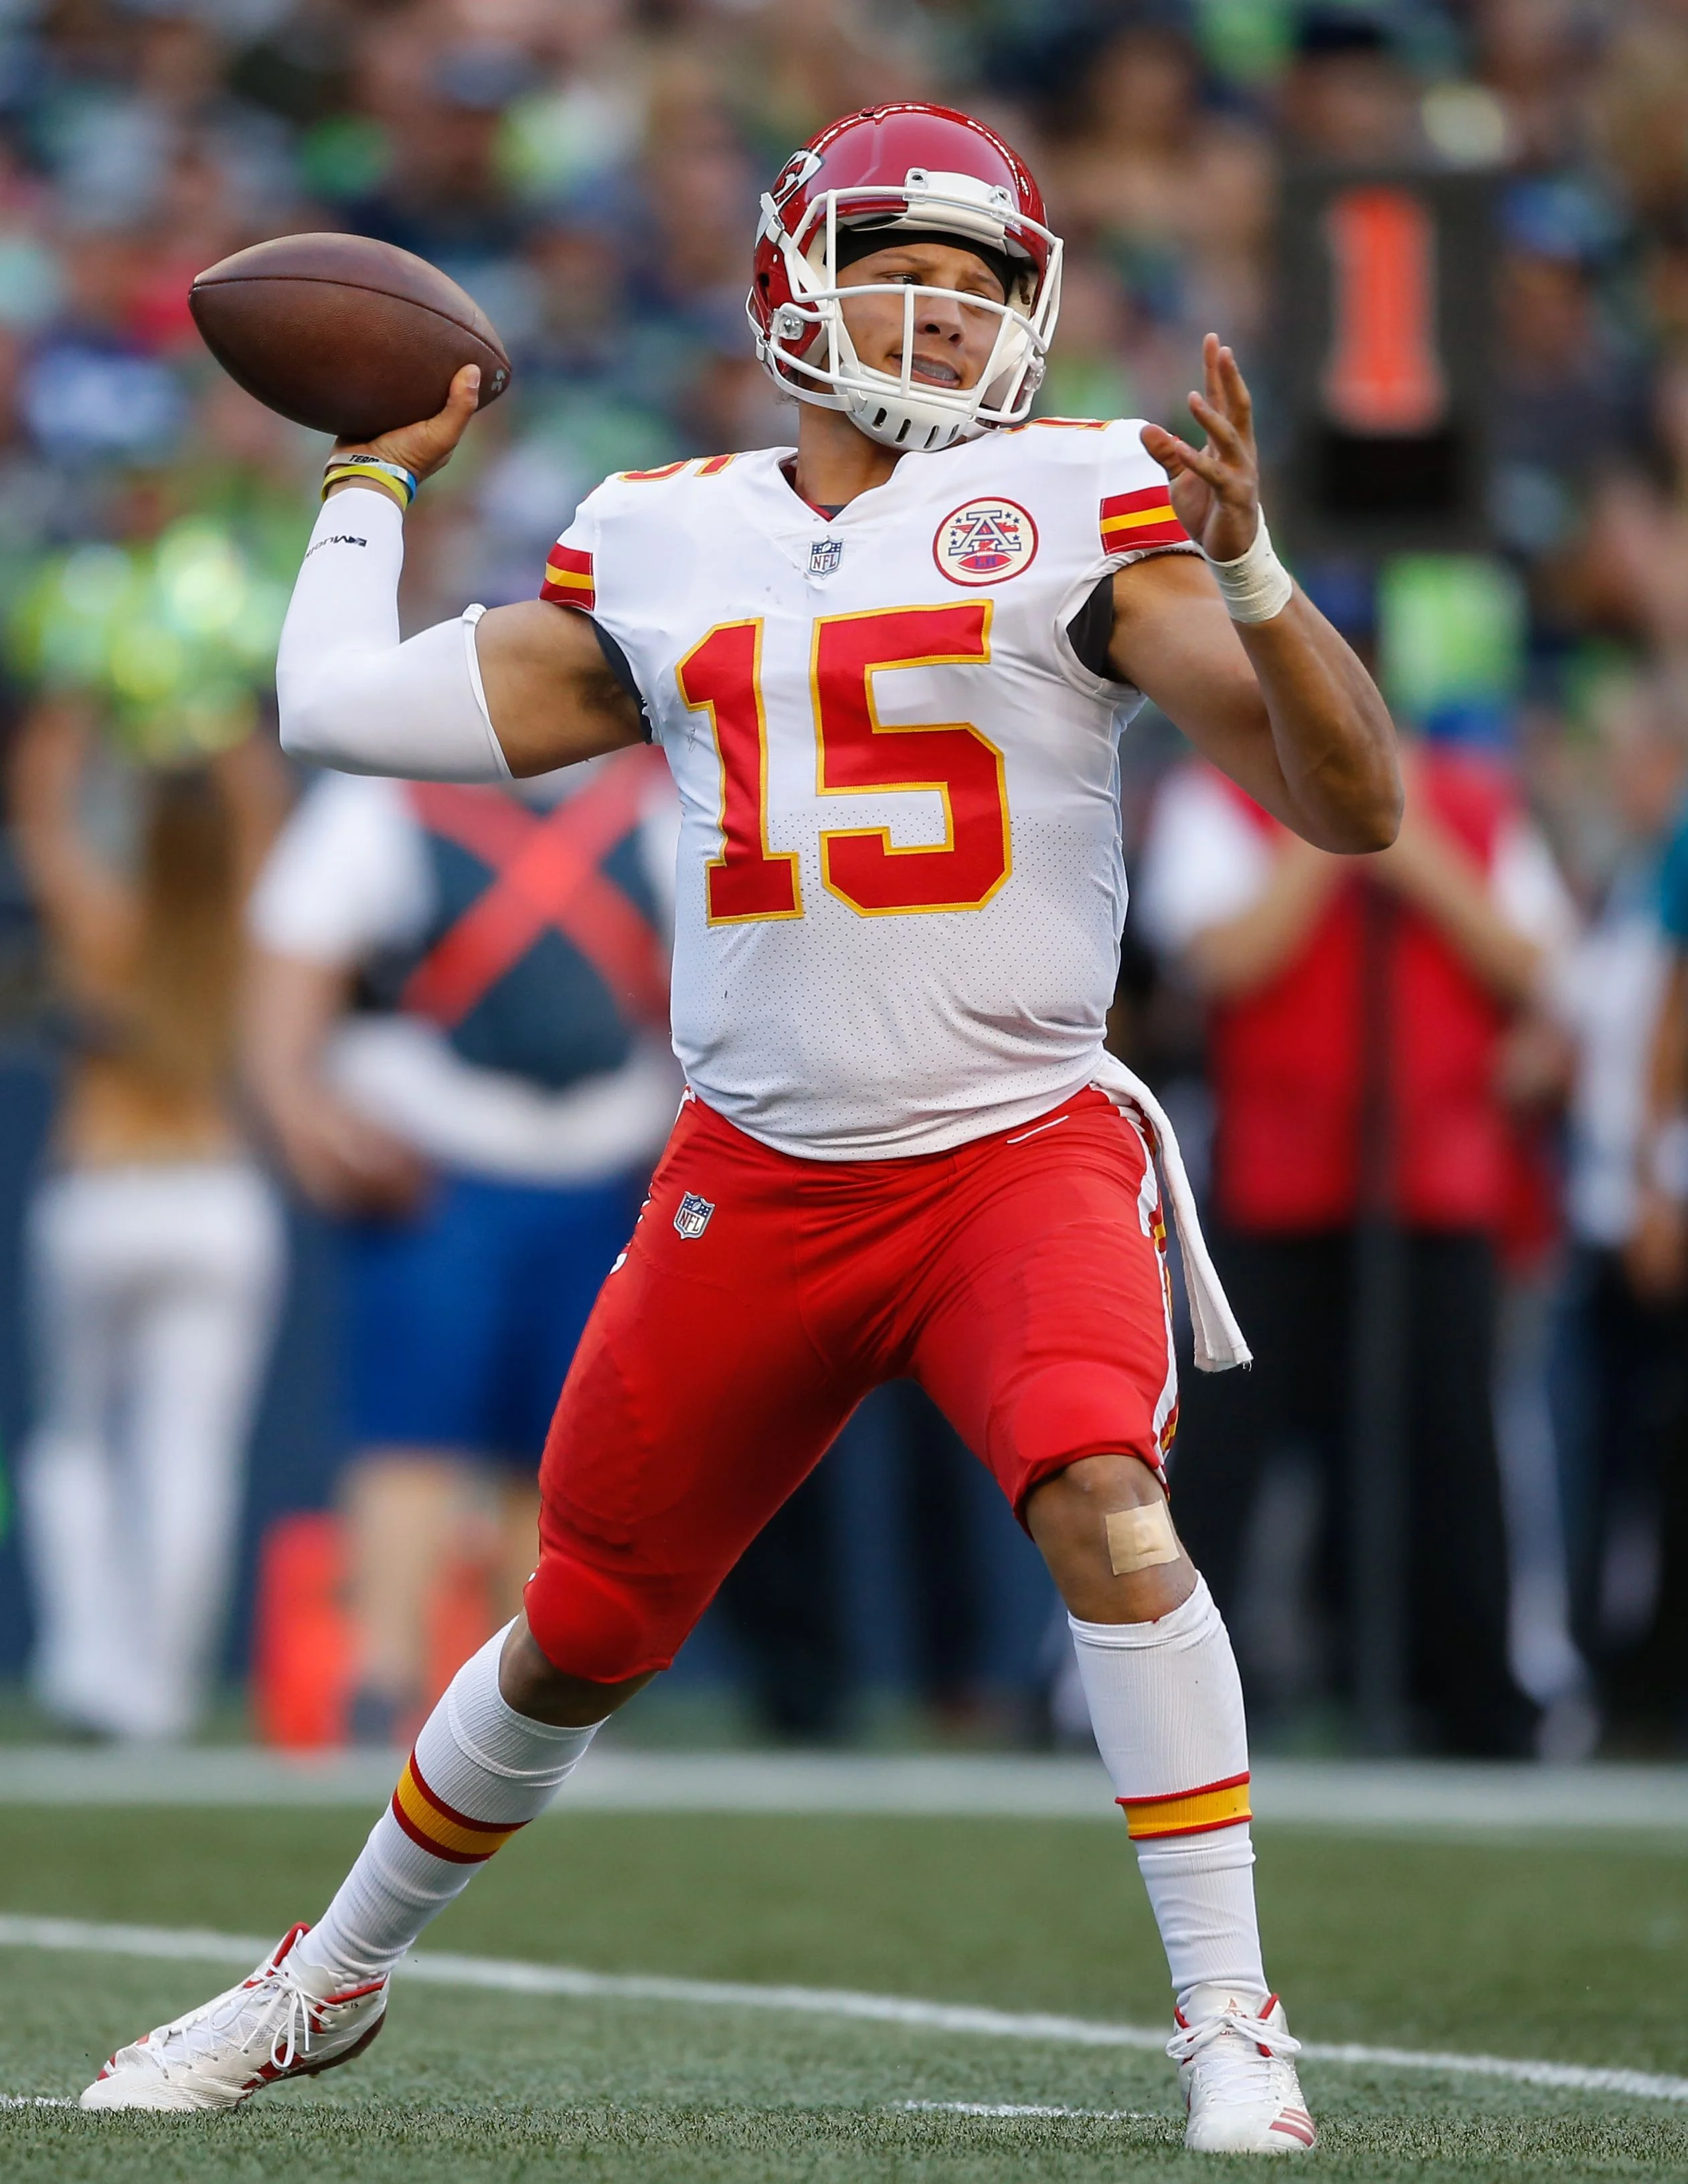 Patrick Mahomes Limps Onto Field, Should Athletes Be Playing While Injured?